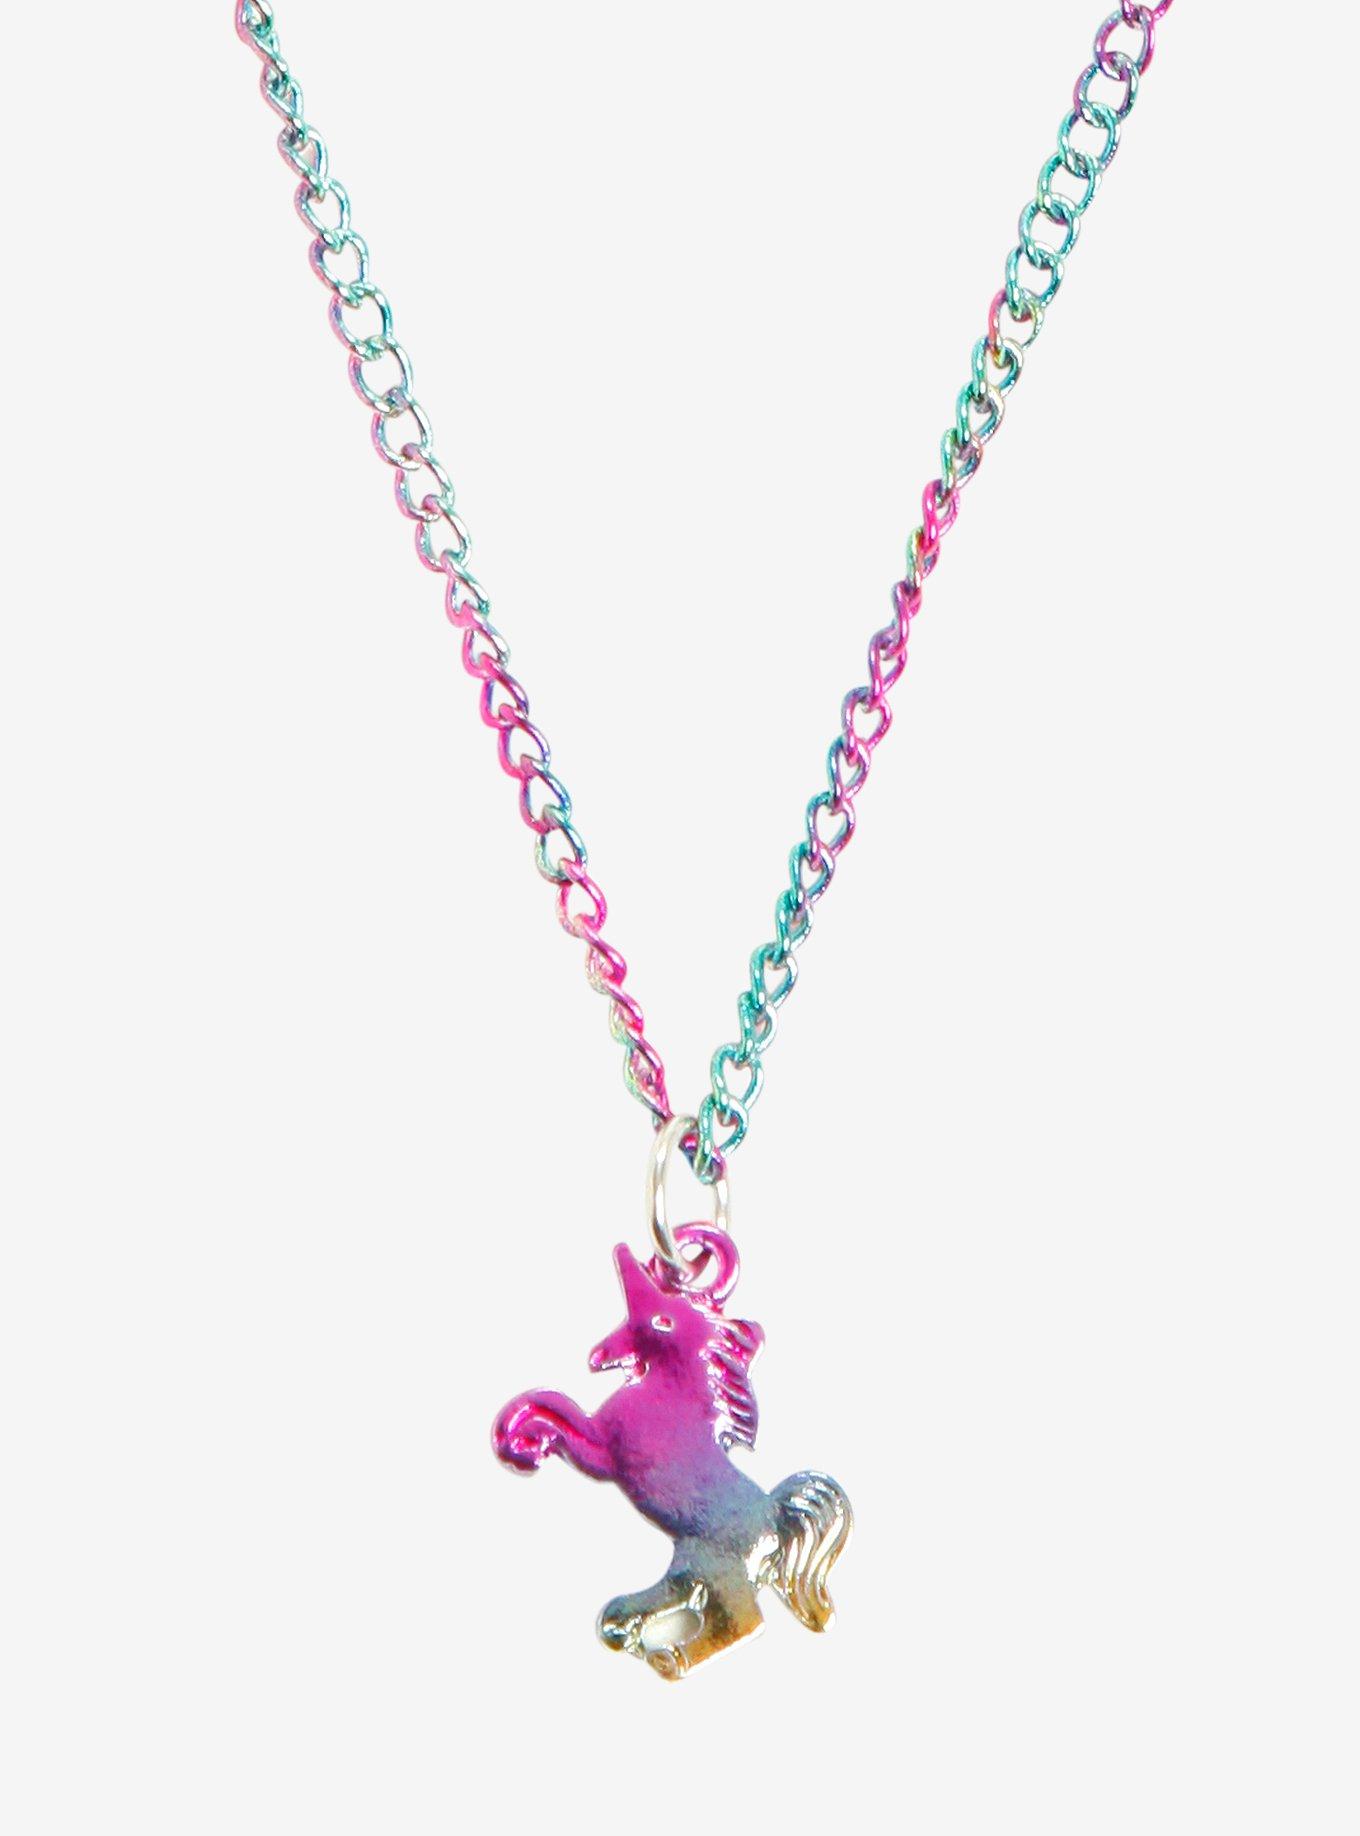 Anodized Unicorn Necklace In A Tube, , hi-res